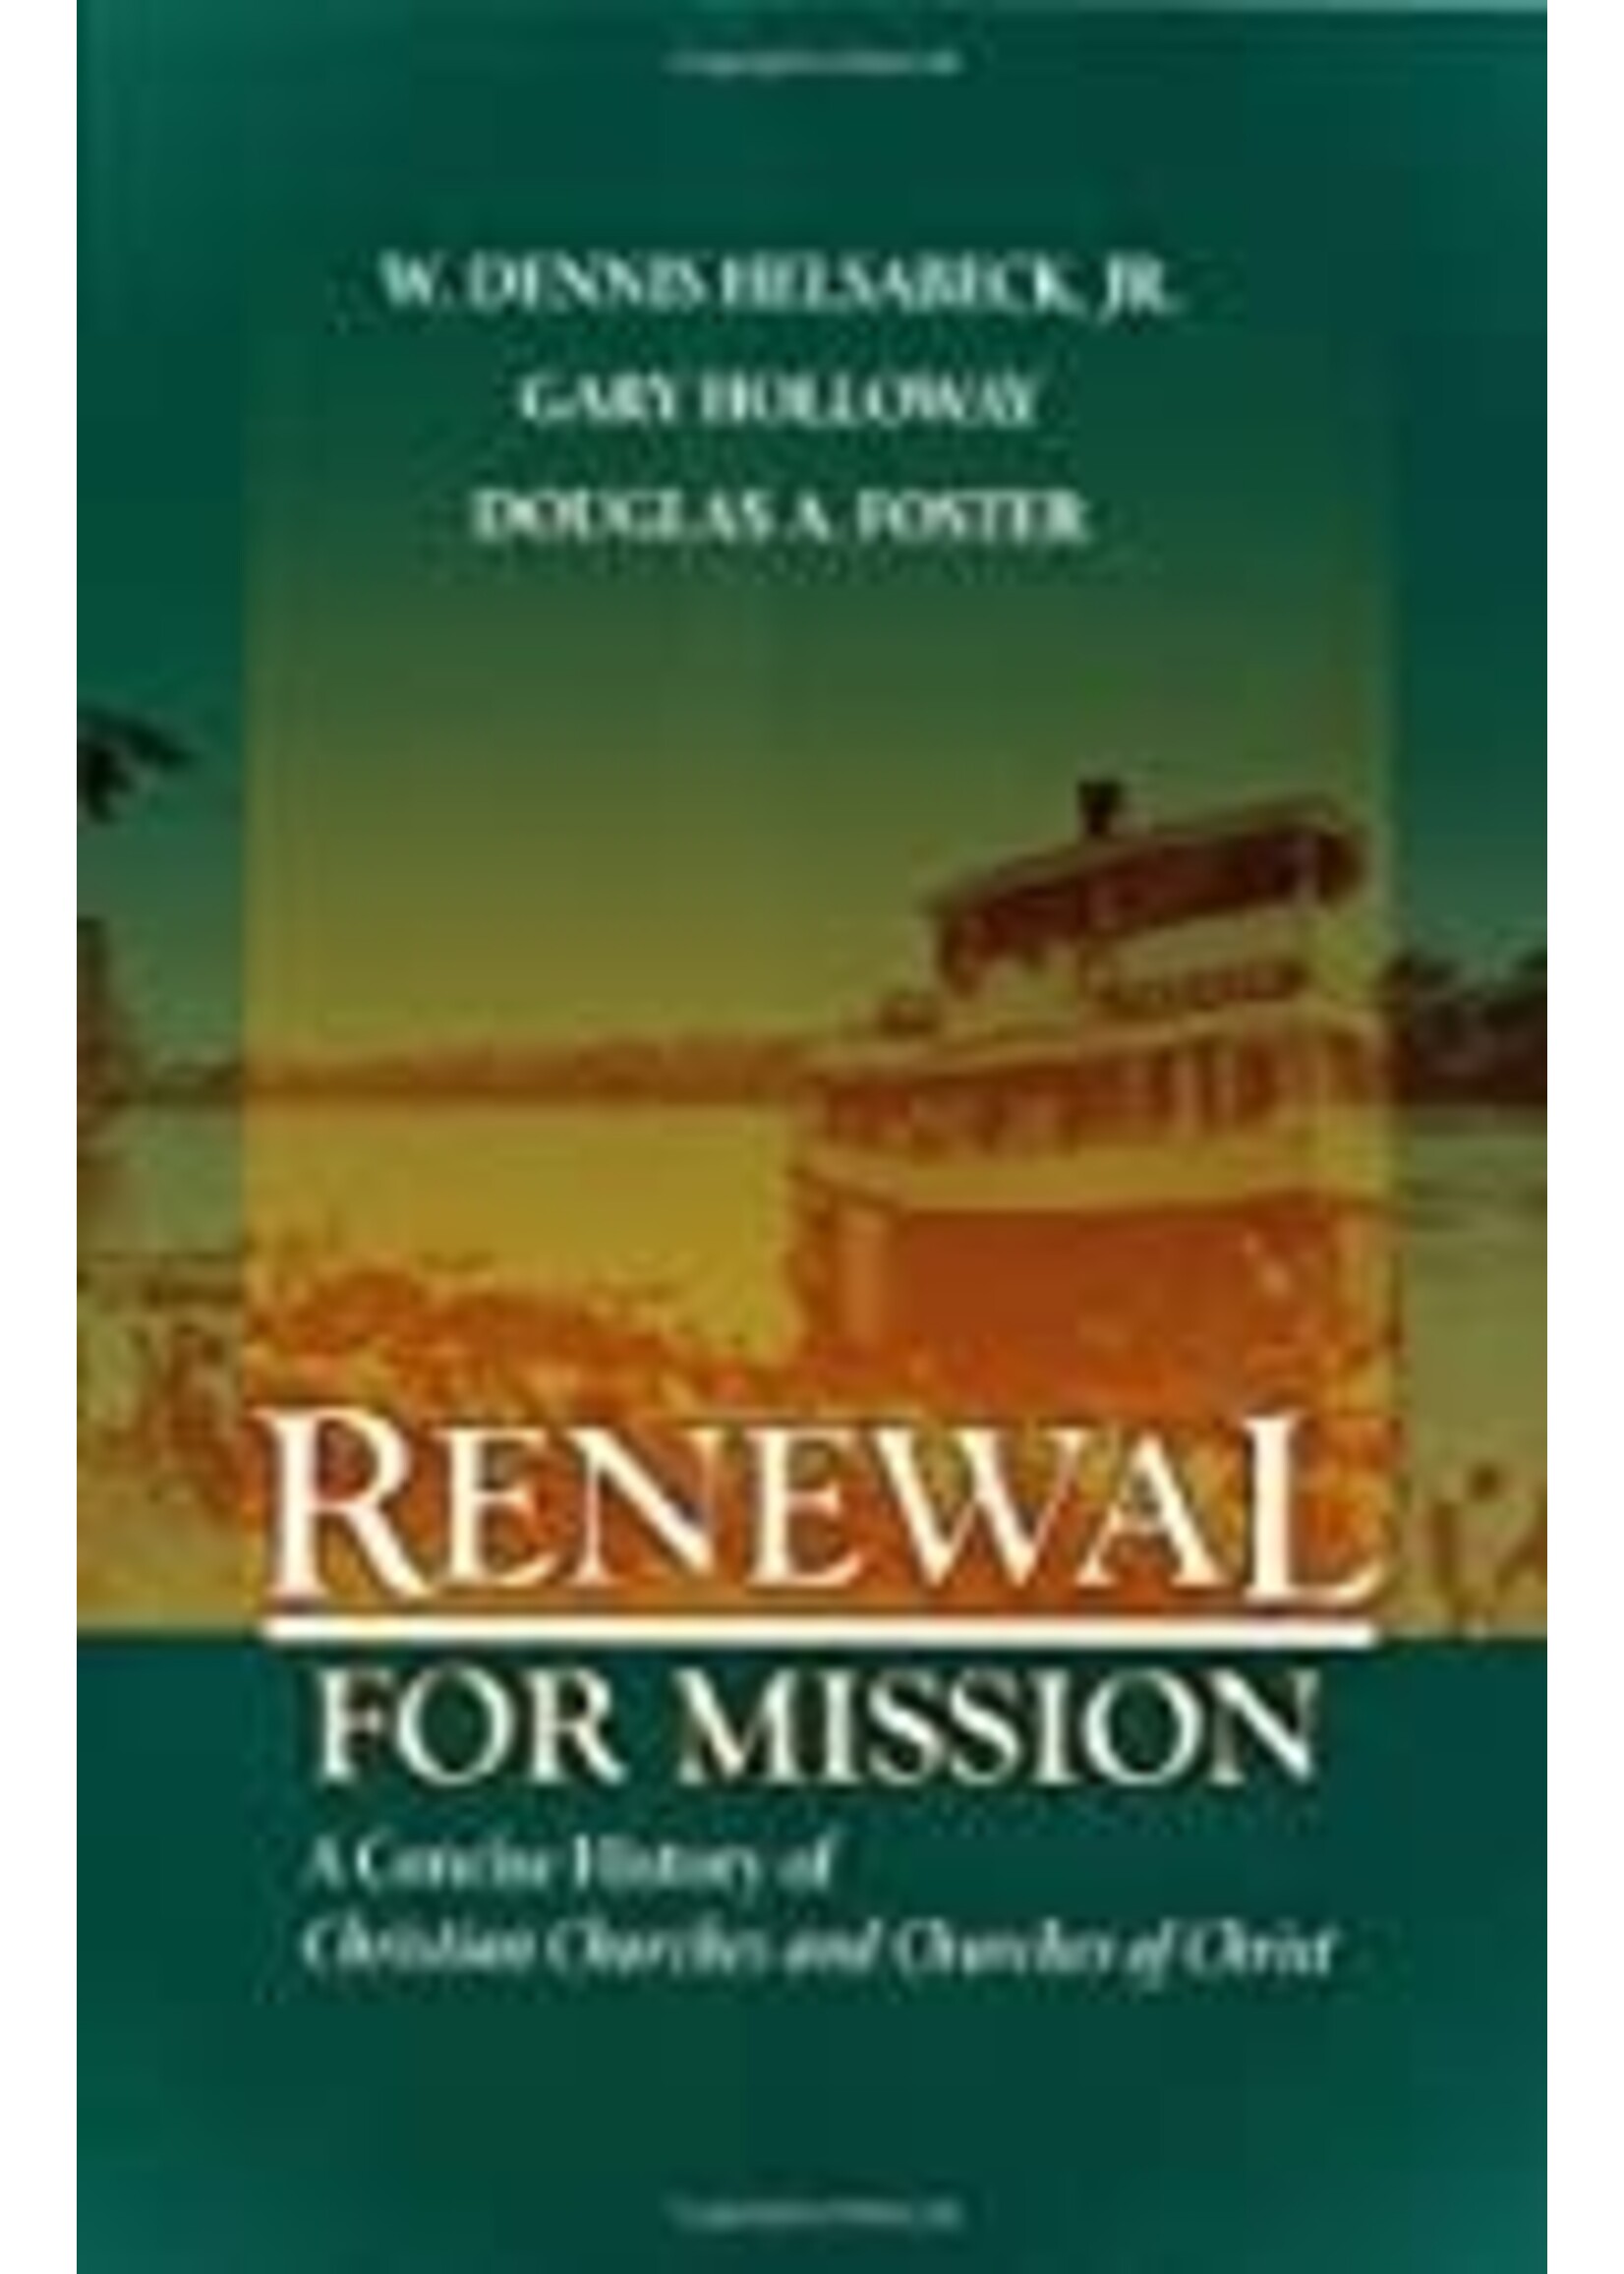 RENEWAL FOR MISSION